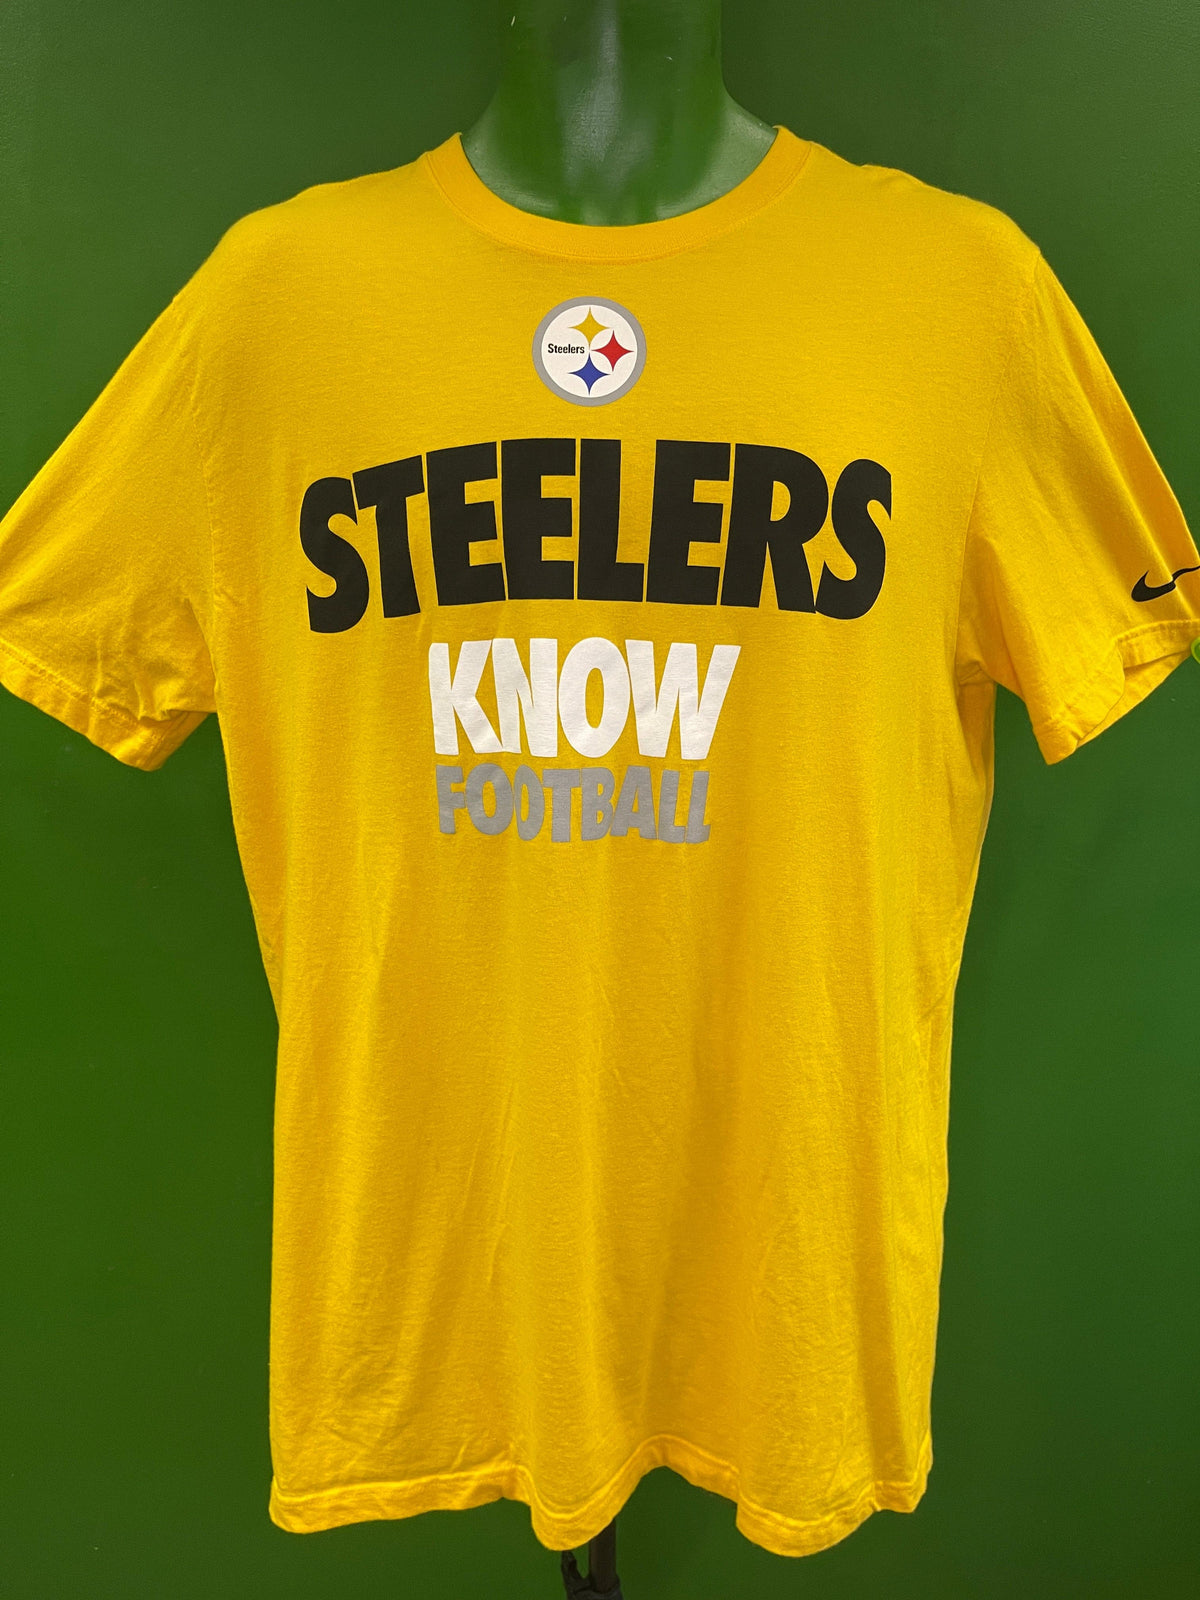 NFL Pittsburgh Steelers Yellow "Steelers Know Football" T-Shirt Men's Large